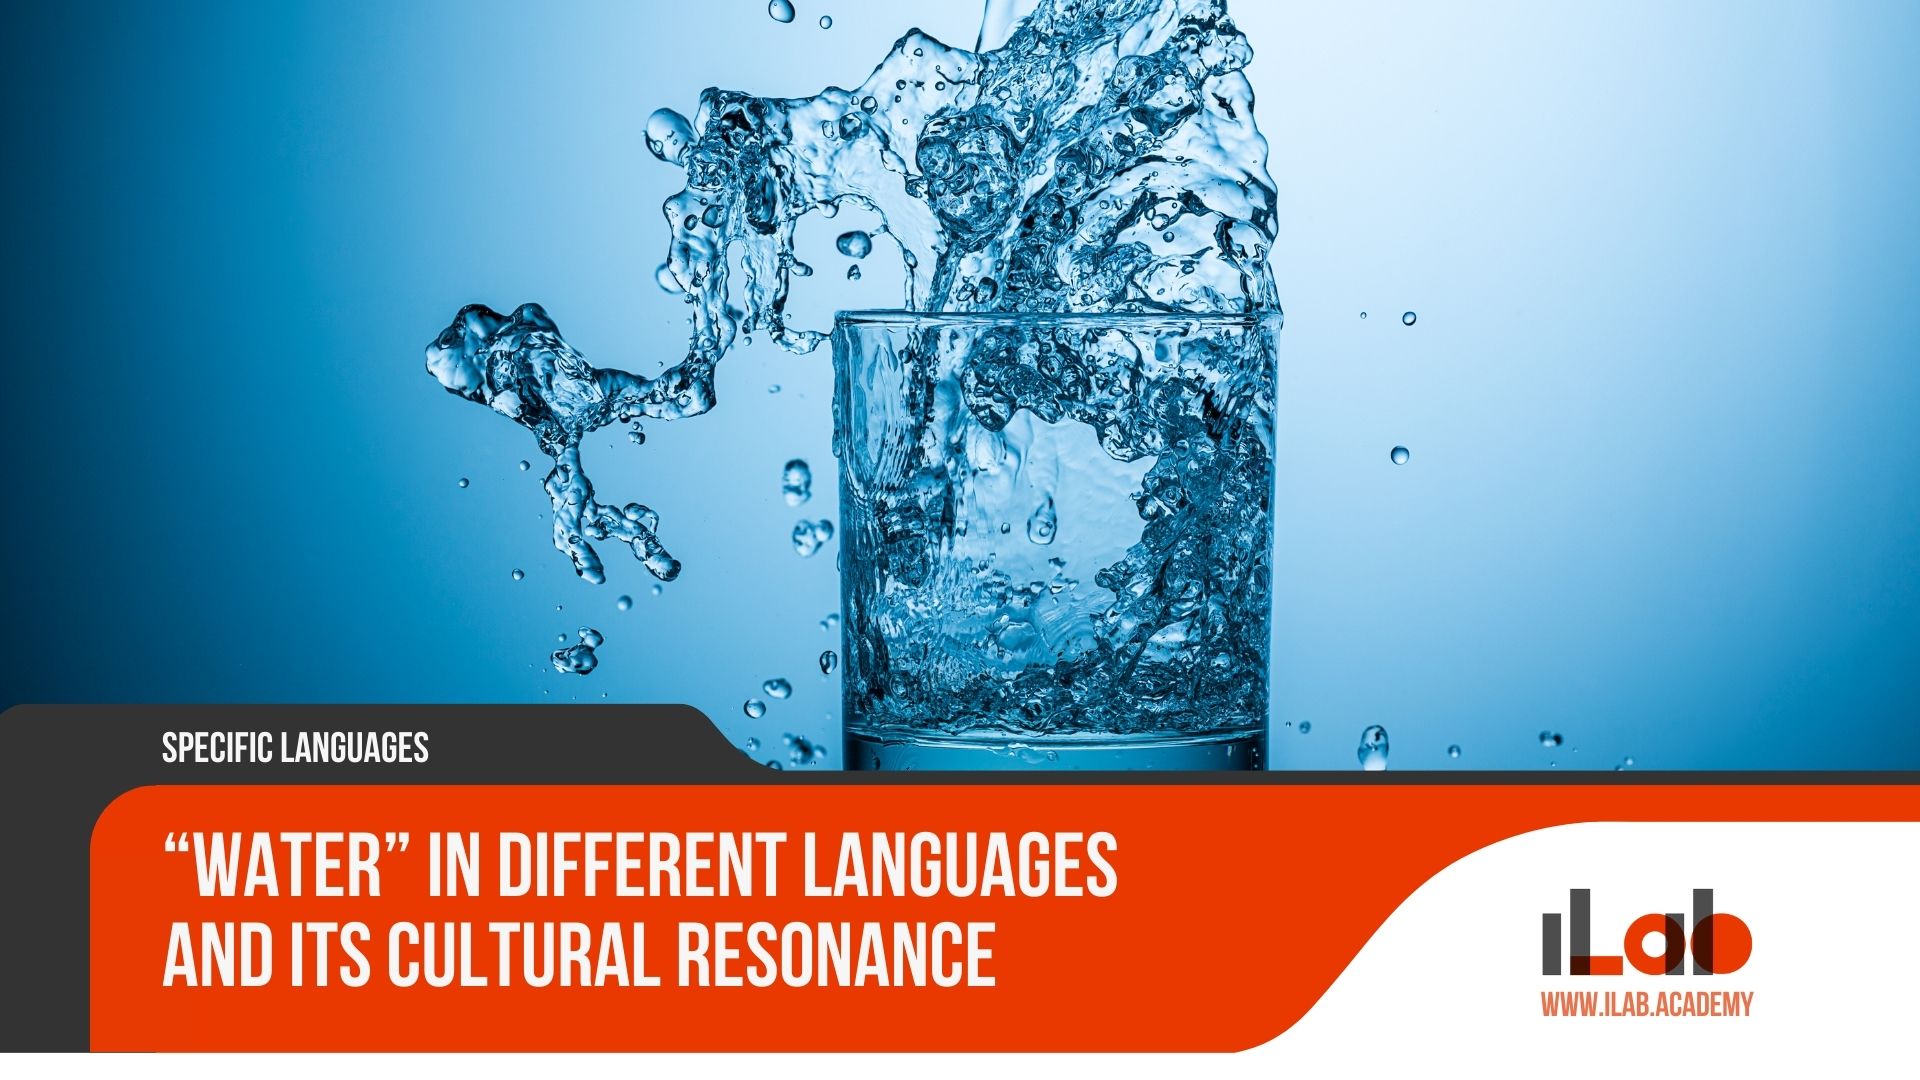 “Water” in Different Languages and Its Cultural Resonance